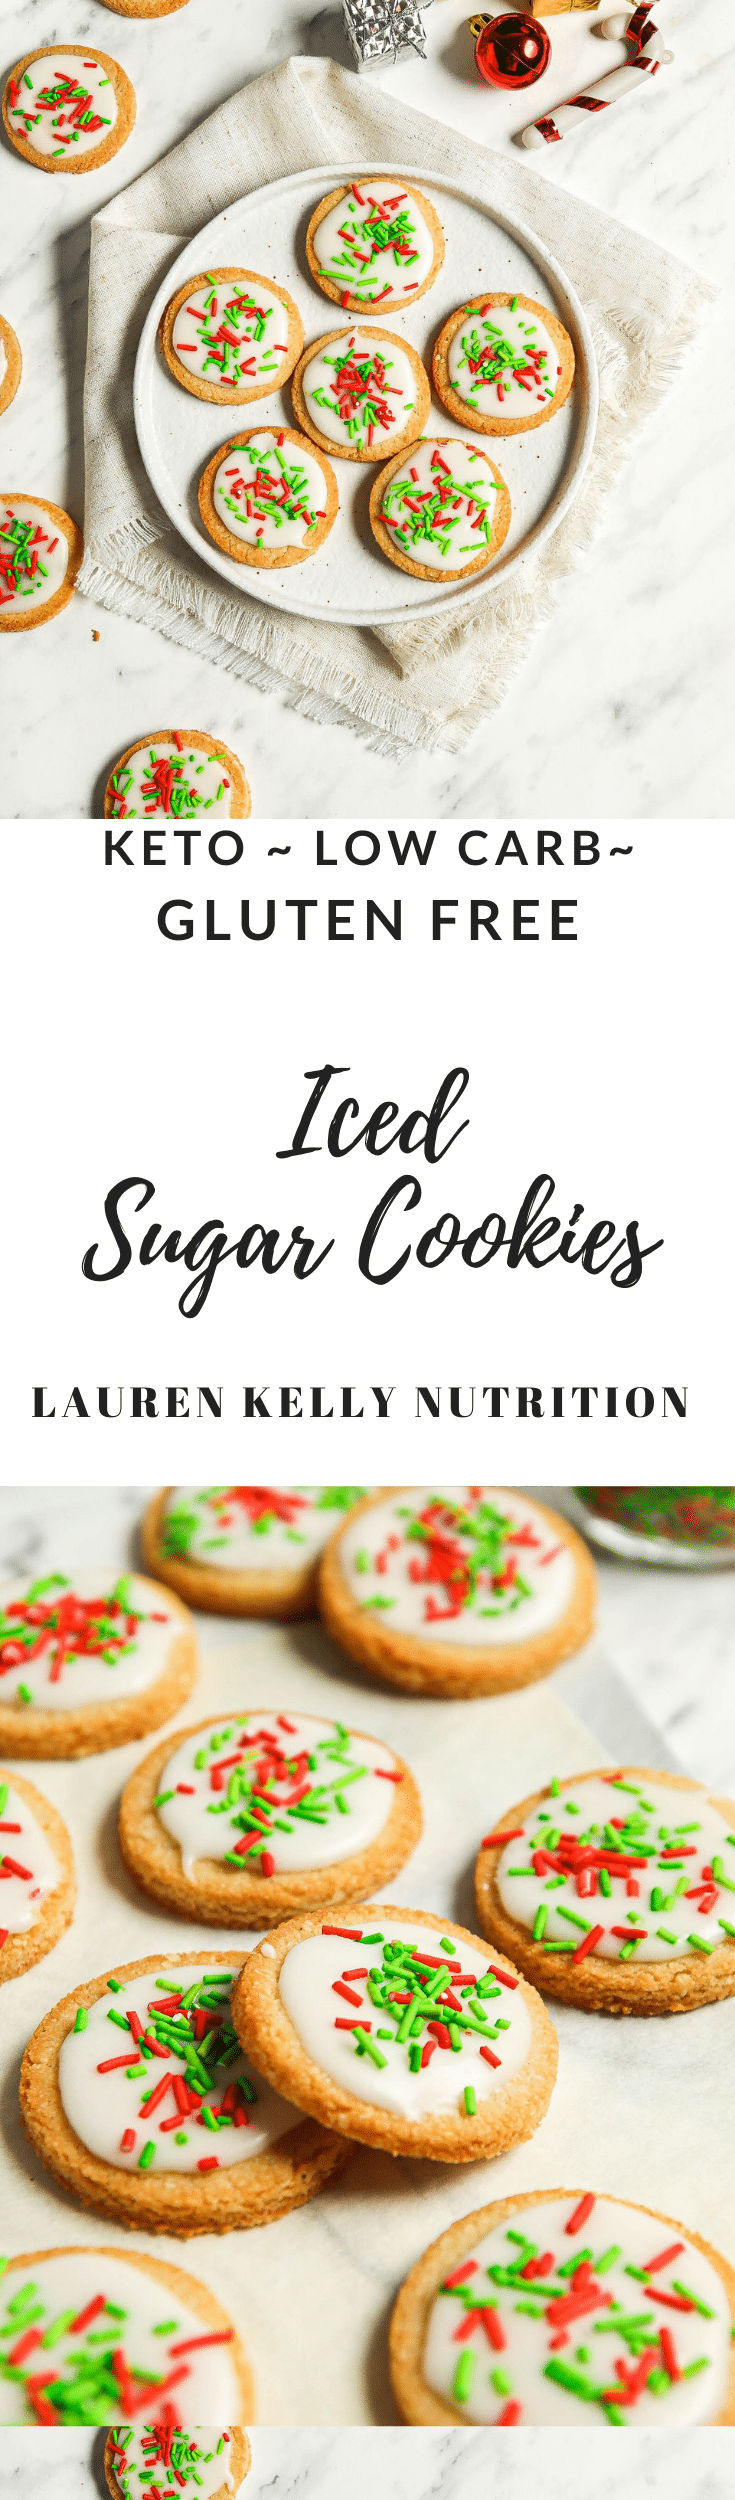 These delicious Iced Sugar Cookies are easy to make with just a few simple ingredients and are sugar free, low carb and gluten free.